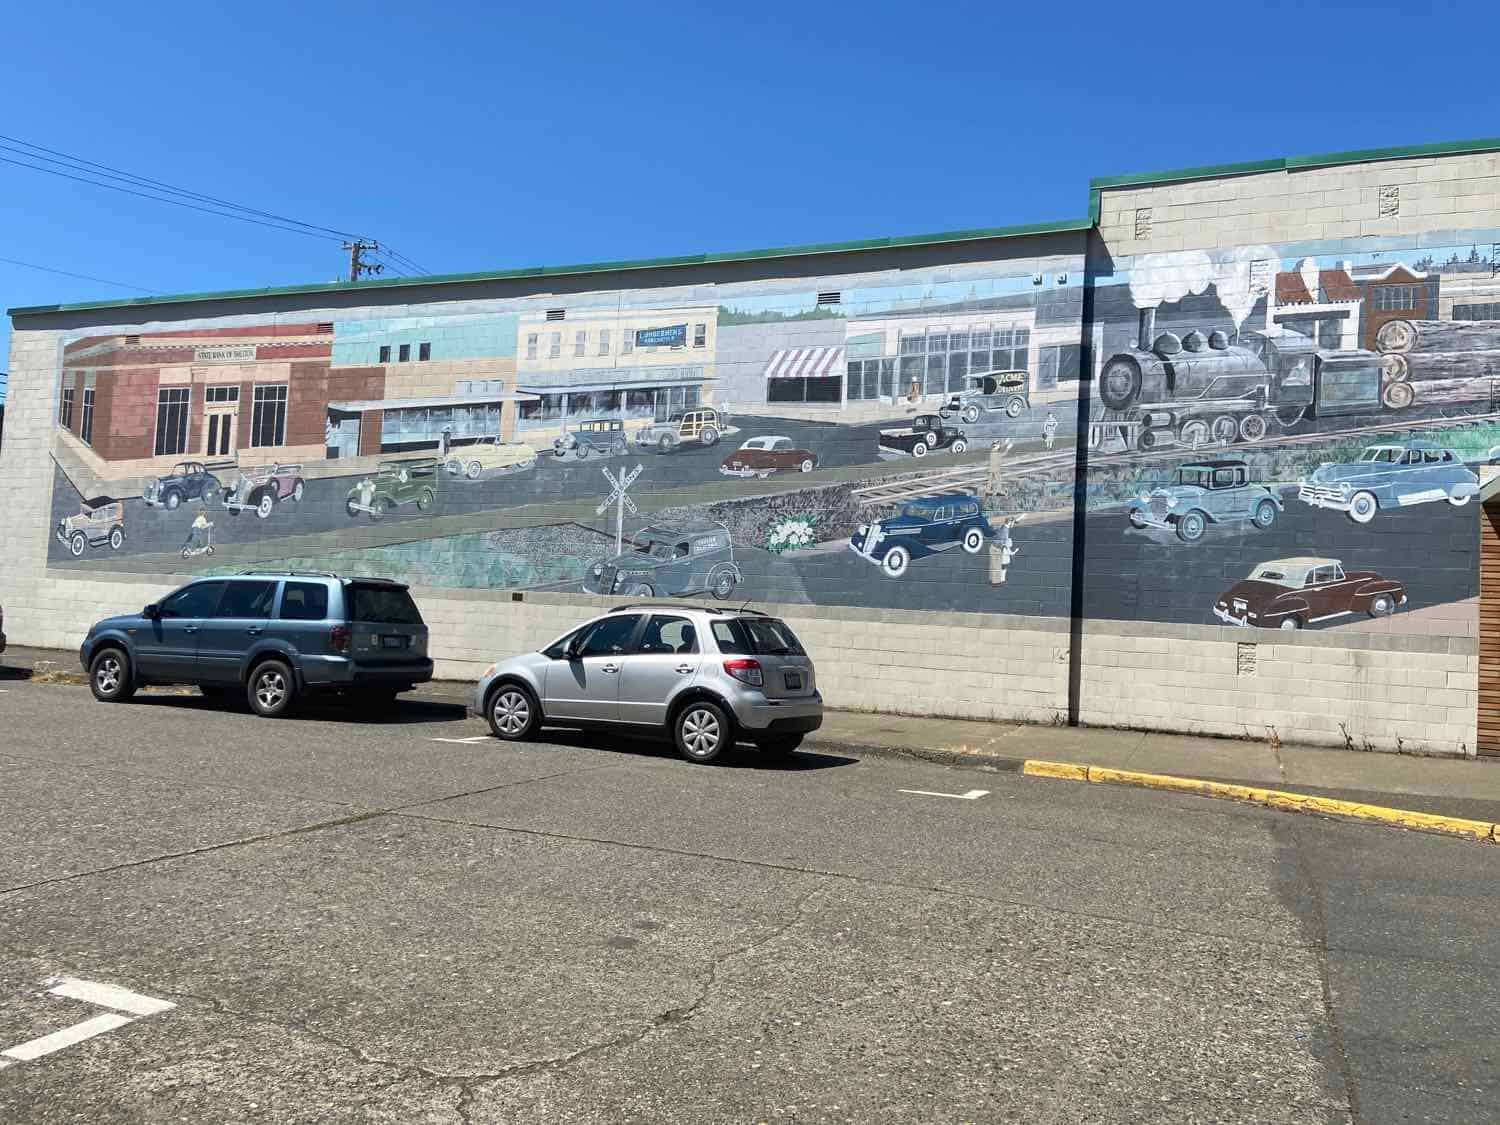 cars parked in front of a mural painted on a building in Shelton, Washington